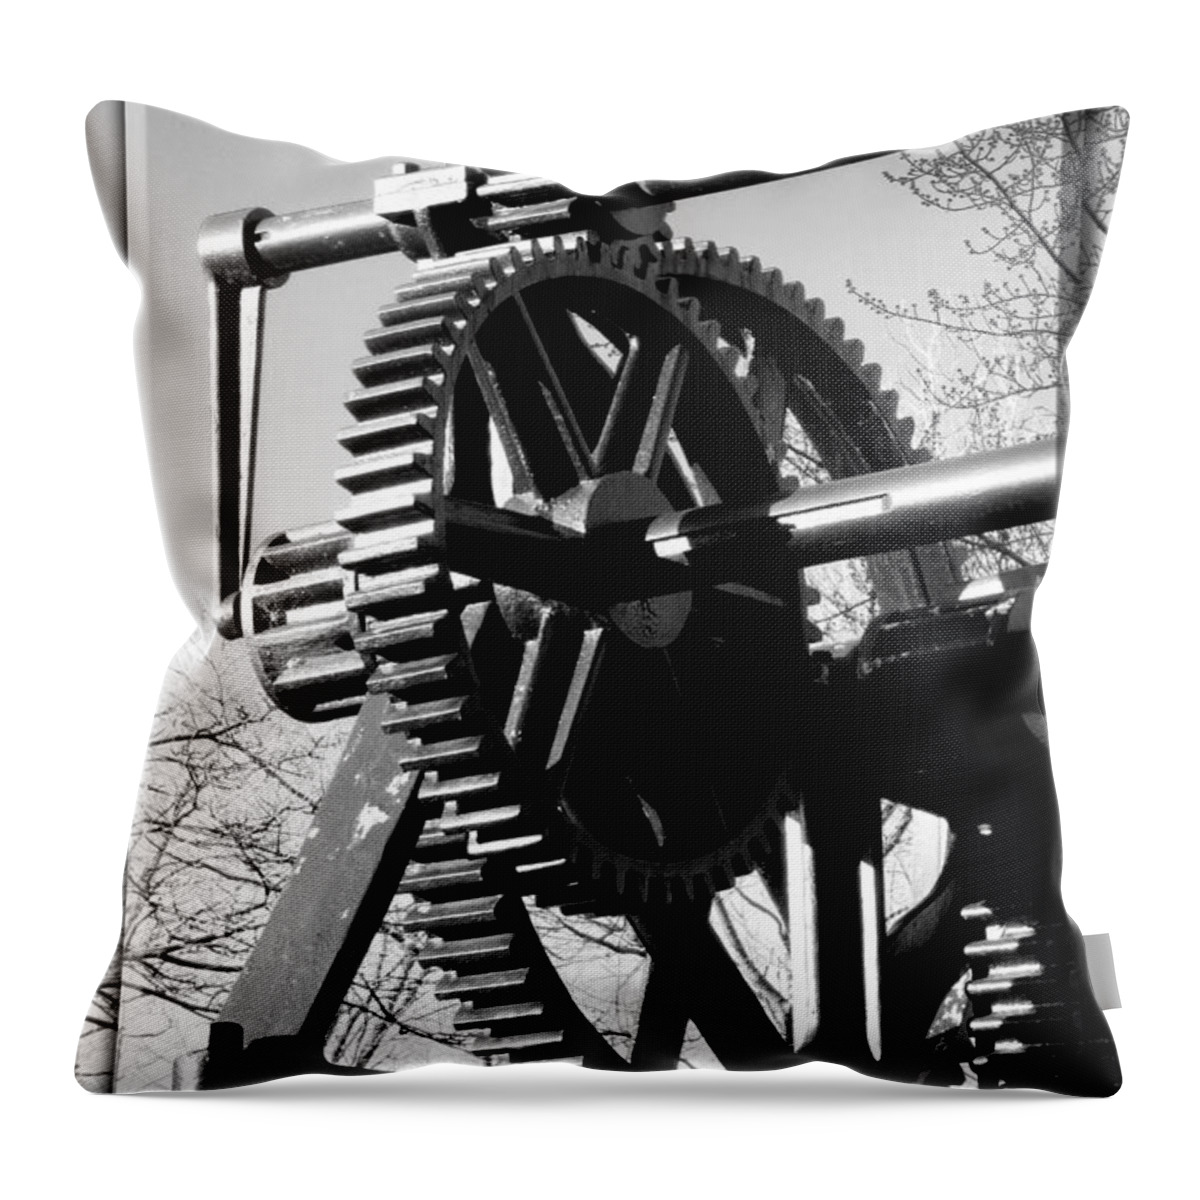 Gears Throw Pillow featuring the photograph Outer Workings by Greg Fortier